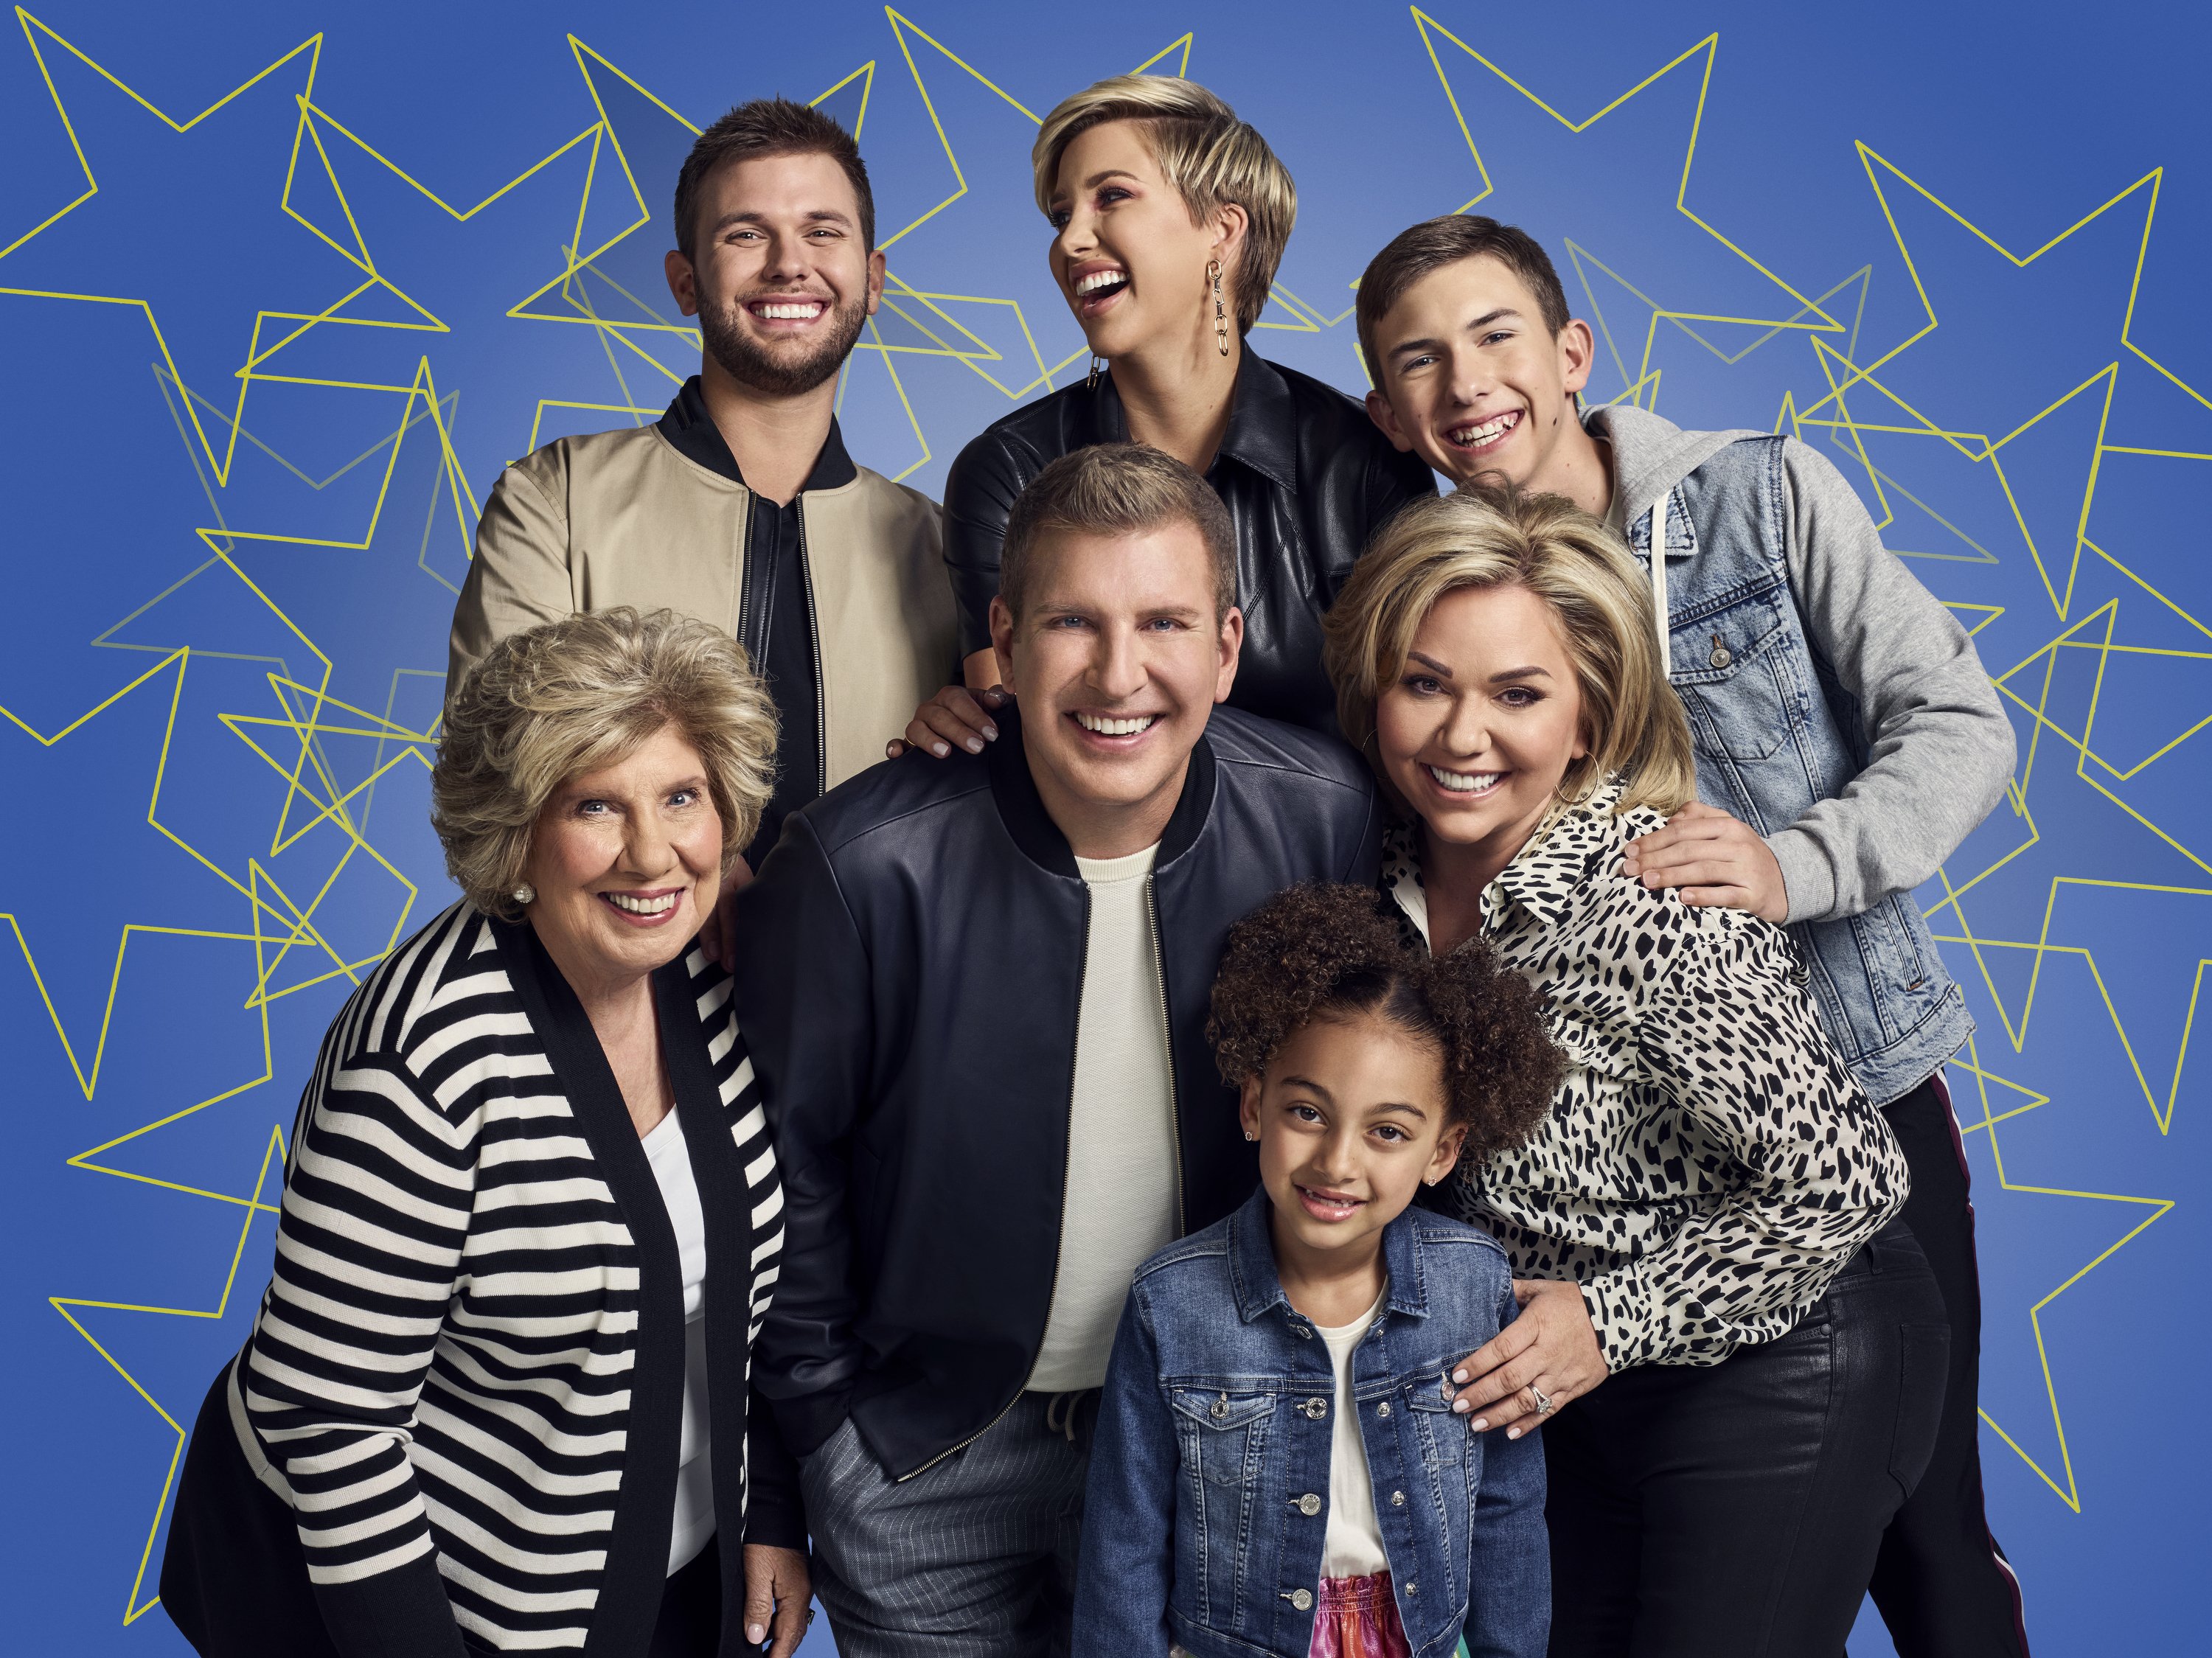 Chisley Knows Best -- Season:8 -- Pictured: (l-r) Faye Chrisley, Chase Chrisley, Todd Chrisley, Savannah Chrisley, Chloe Chrisley, Julie Chrisley, Grayson Chrisley | Photo: Getty Images